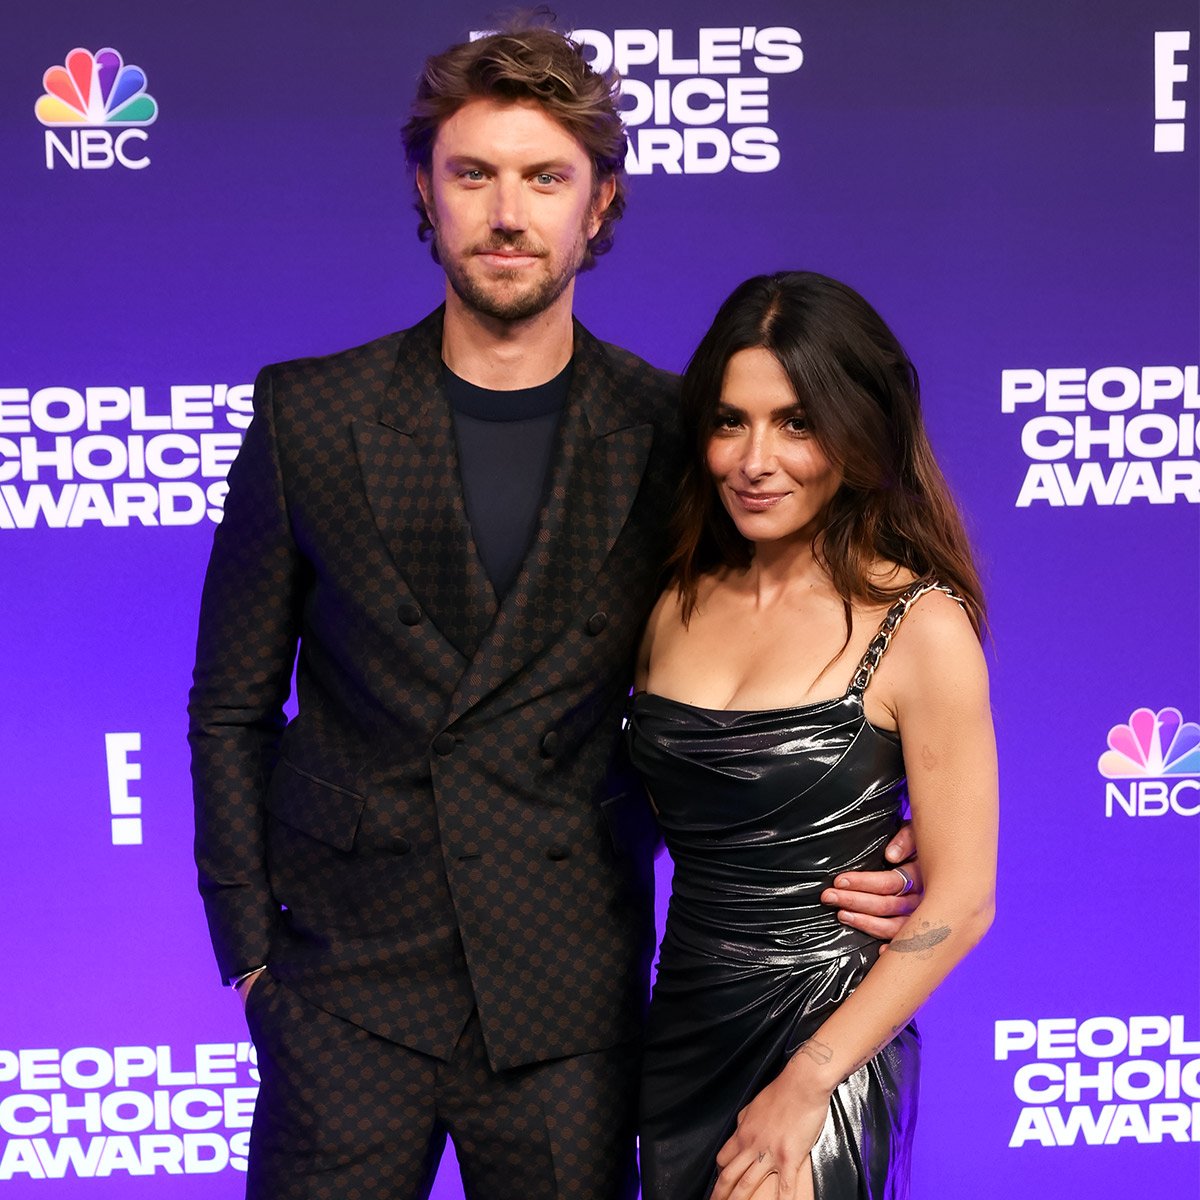 Shawn Johnson, Andrew East and More Couples Who Turned Up the Heat the 2021 People's Choice Awards